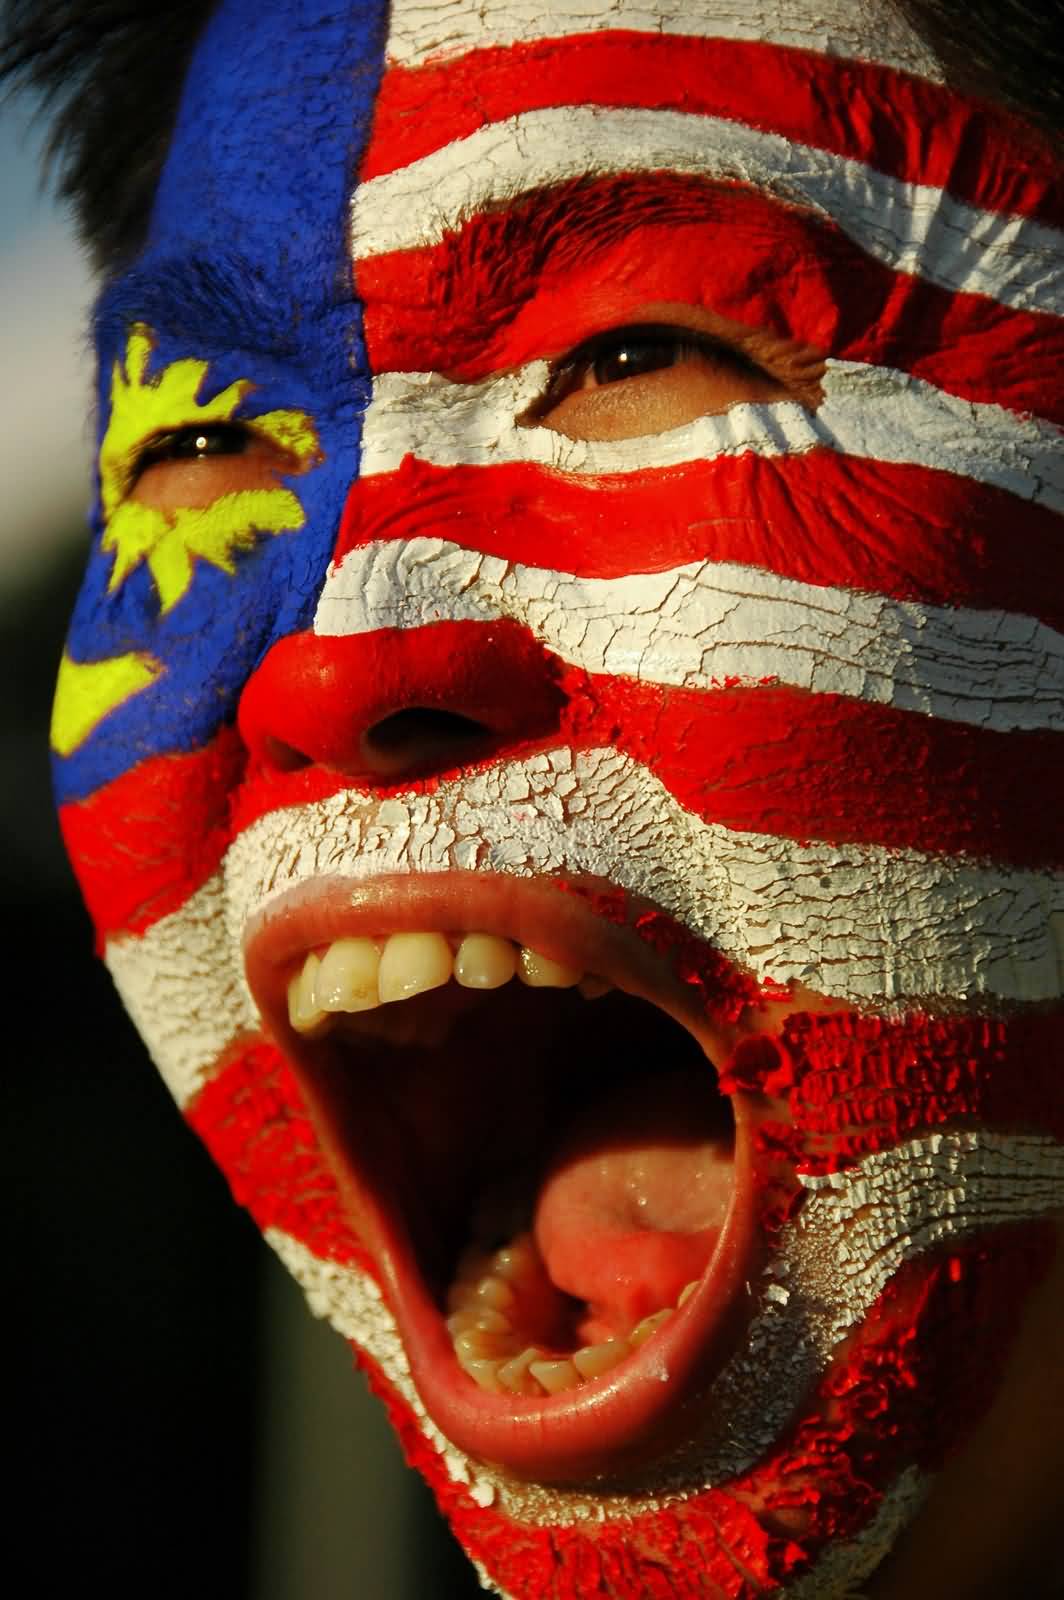 Man With Malaysian Flag Paint On Face During Malaysia Day Celebration